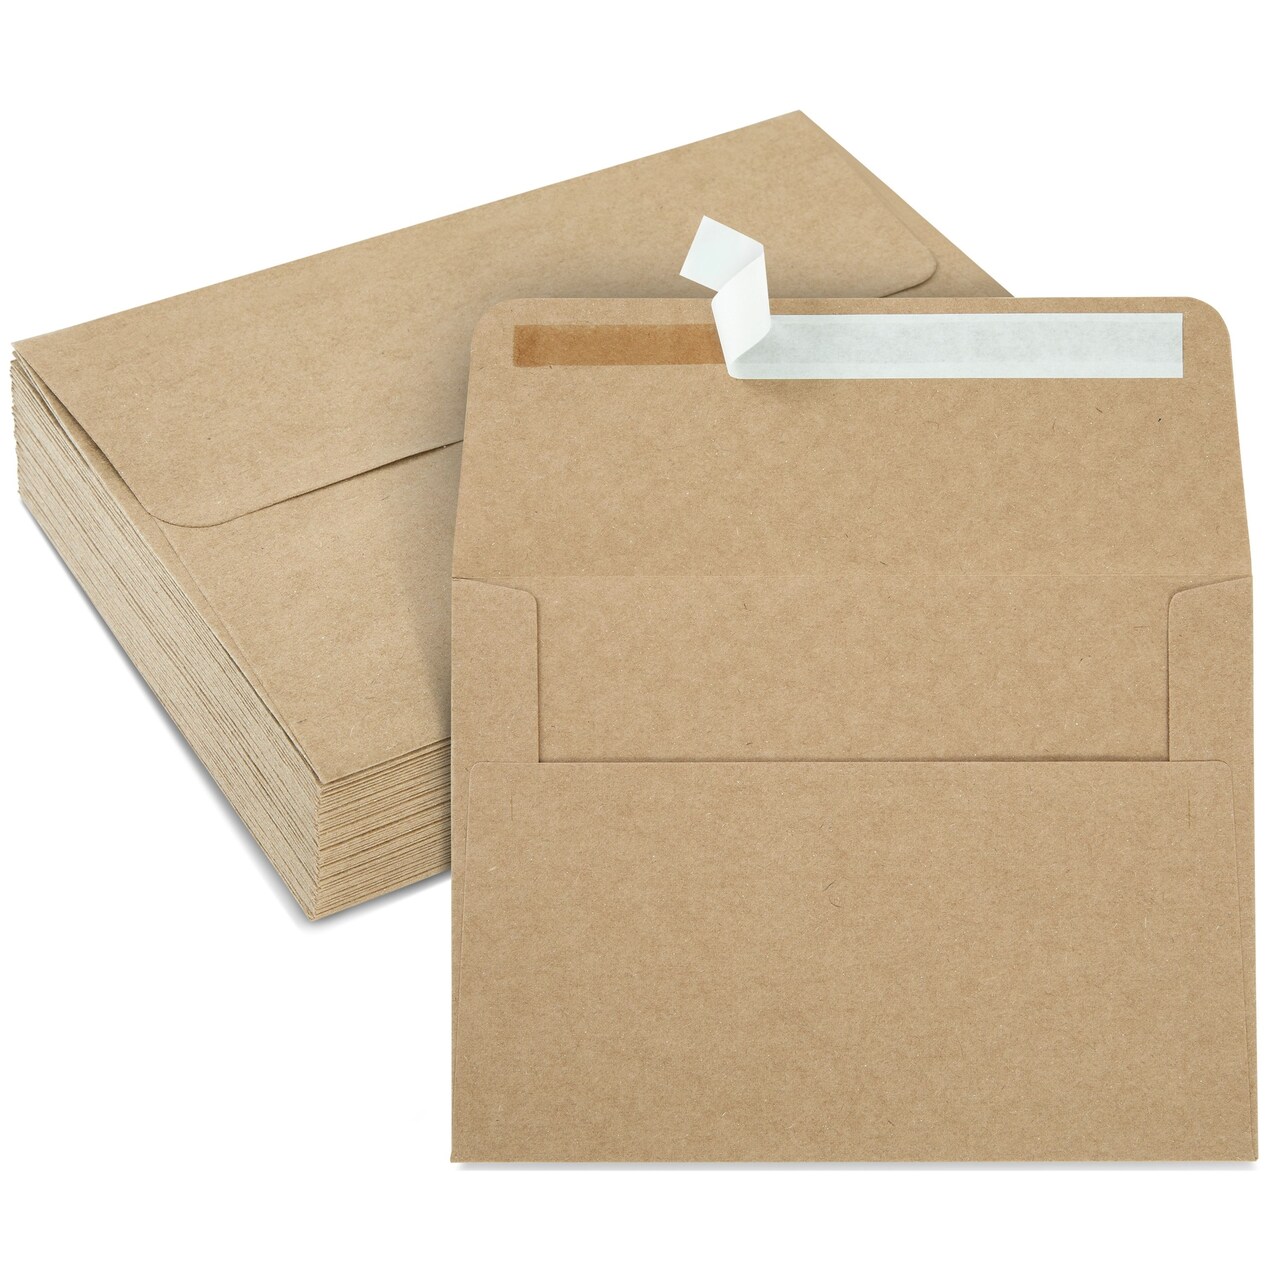 50 Pack Printable A7 Brown Envelopes for 5x7 Cards, Wedding